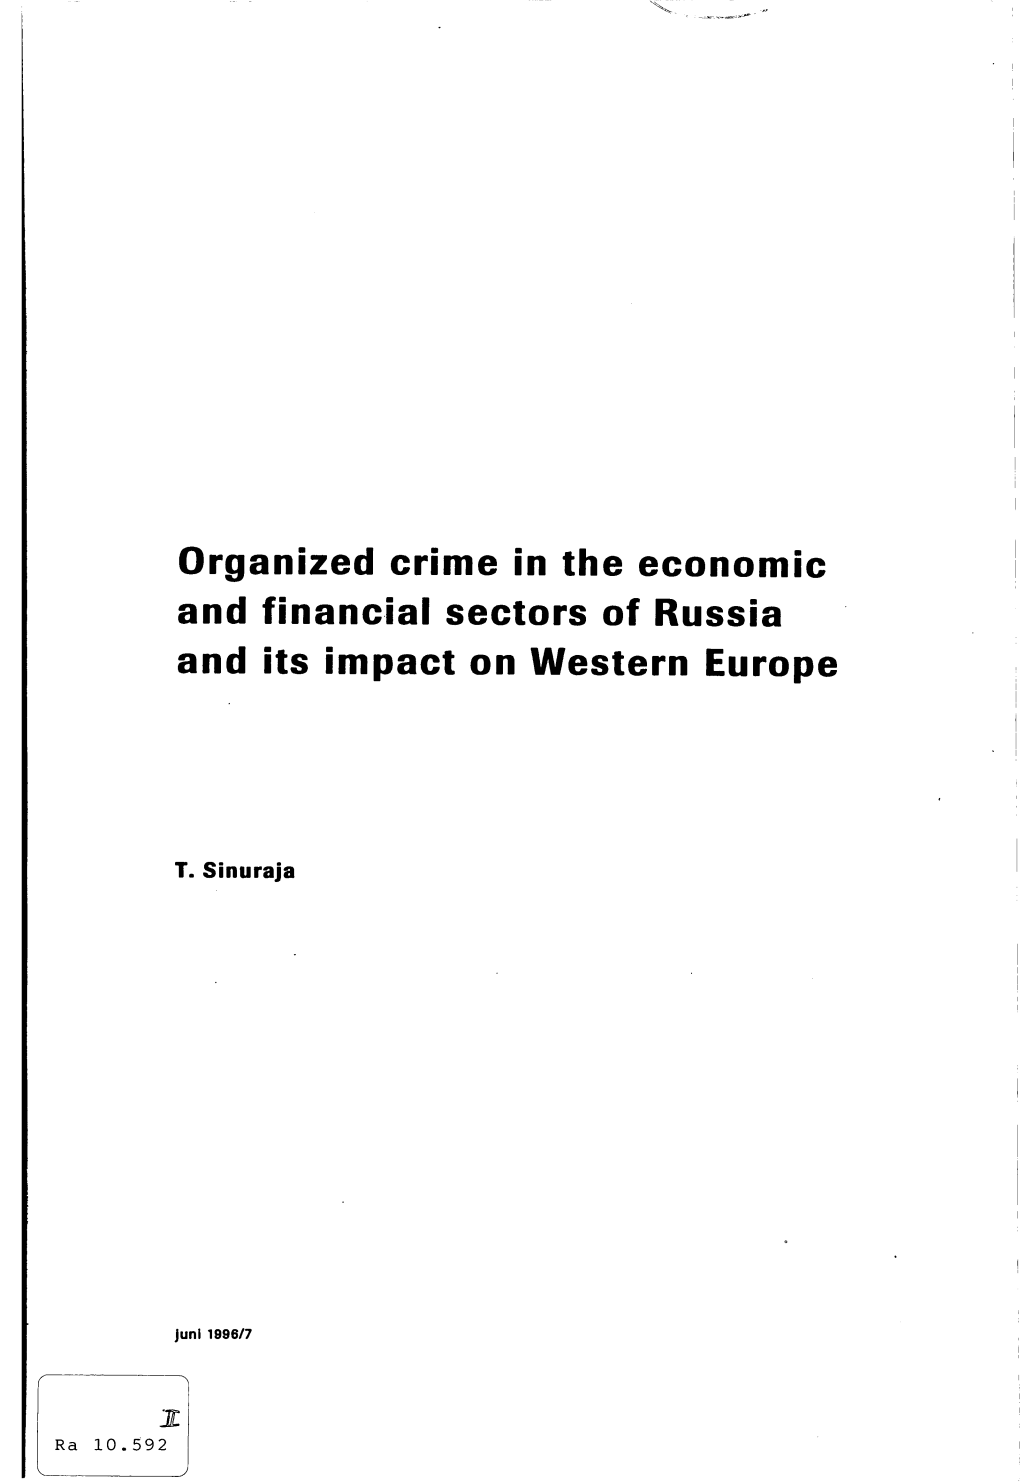 Organized Crime in the Economic and Financial Sectors of Russia and Its Impact on Western Europe